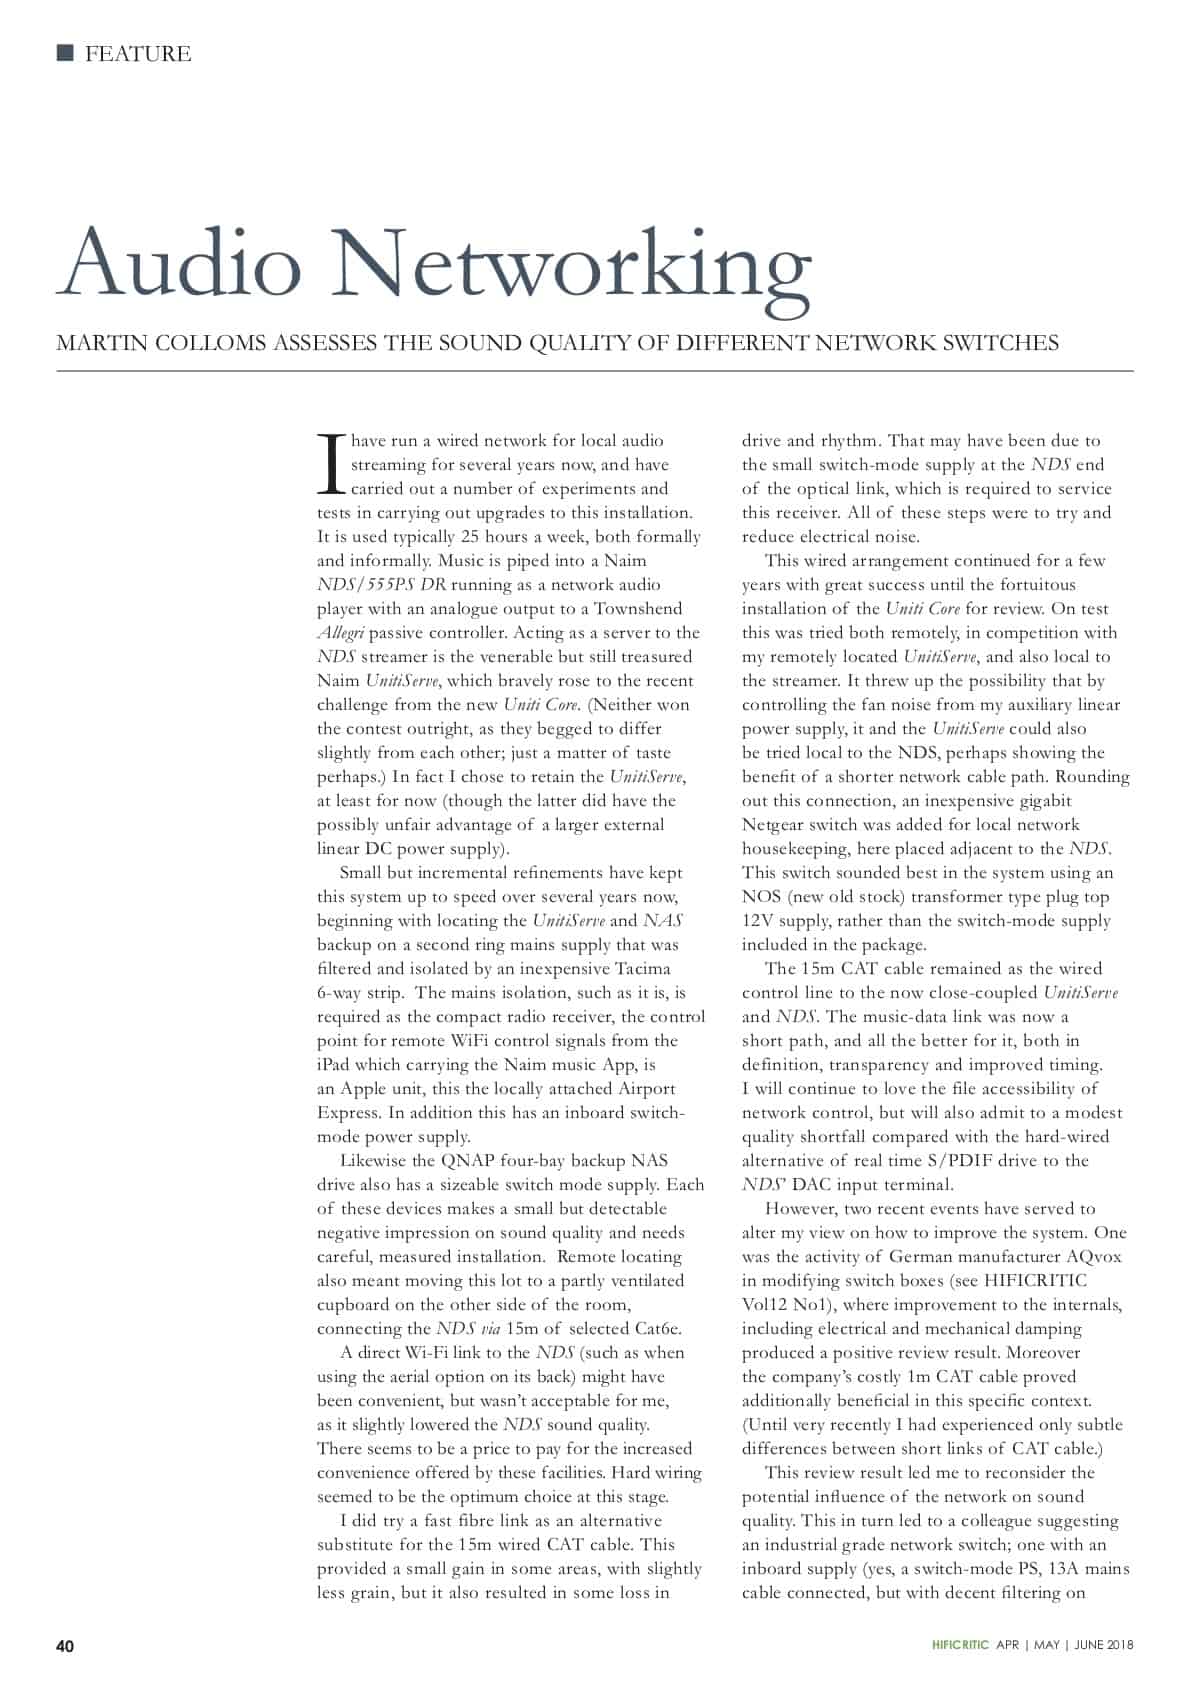 Excerpt-201806-4-Feature-Audio Networking Cisco 2960-pdfimg